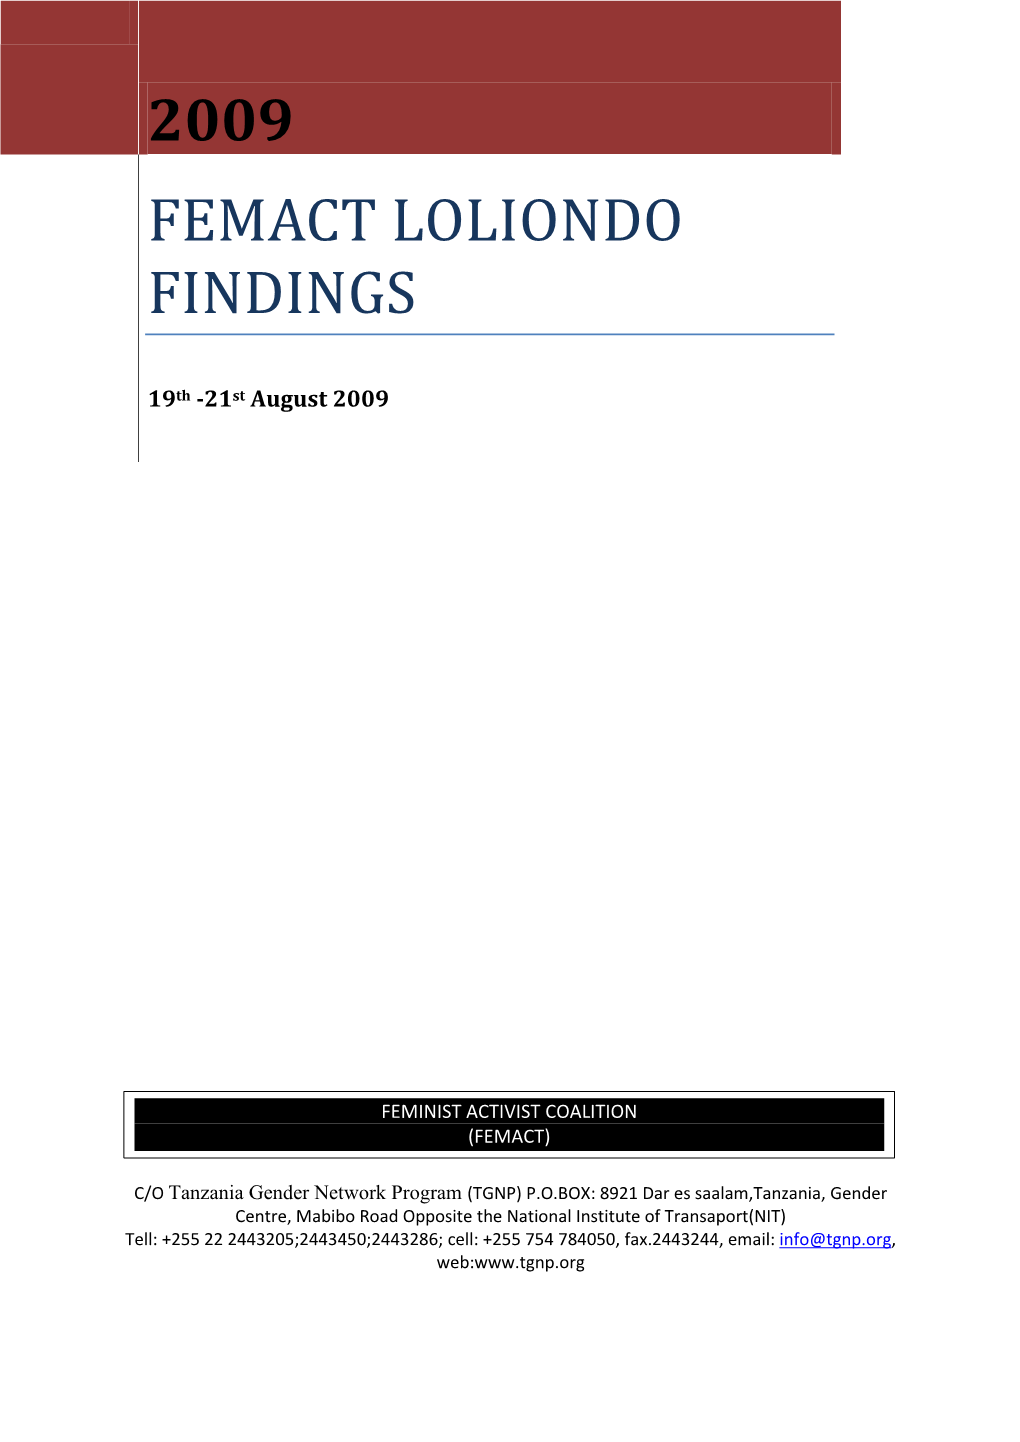 2009 Femact Loliondo Findings